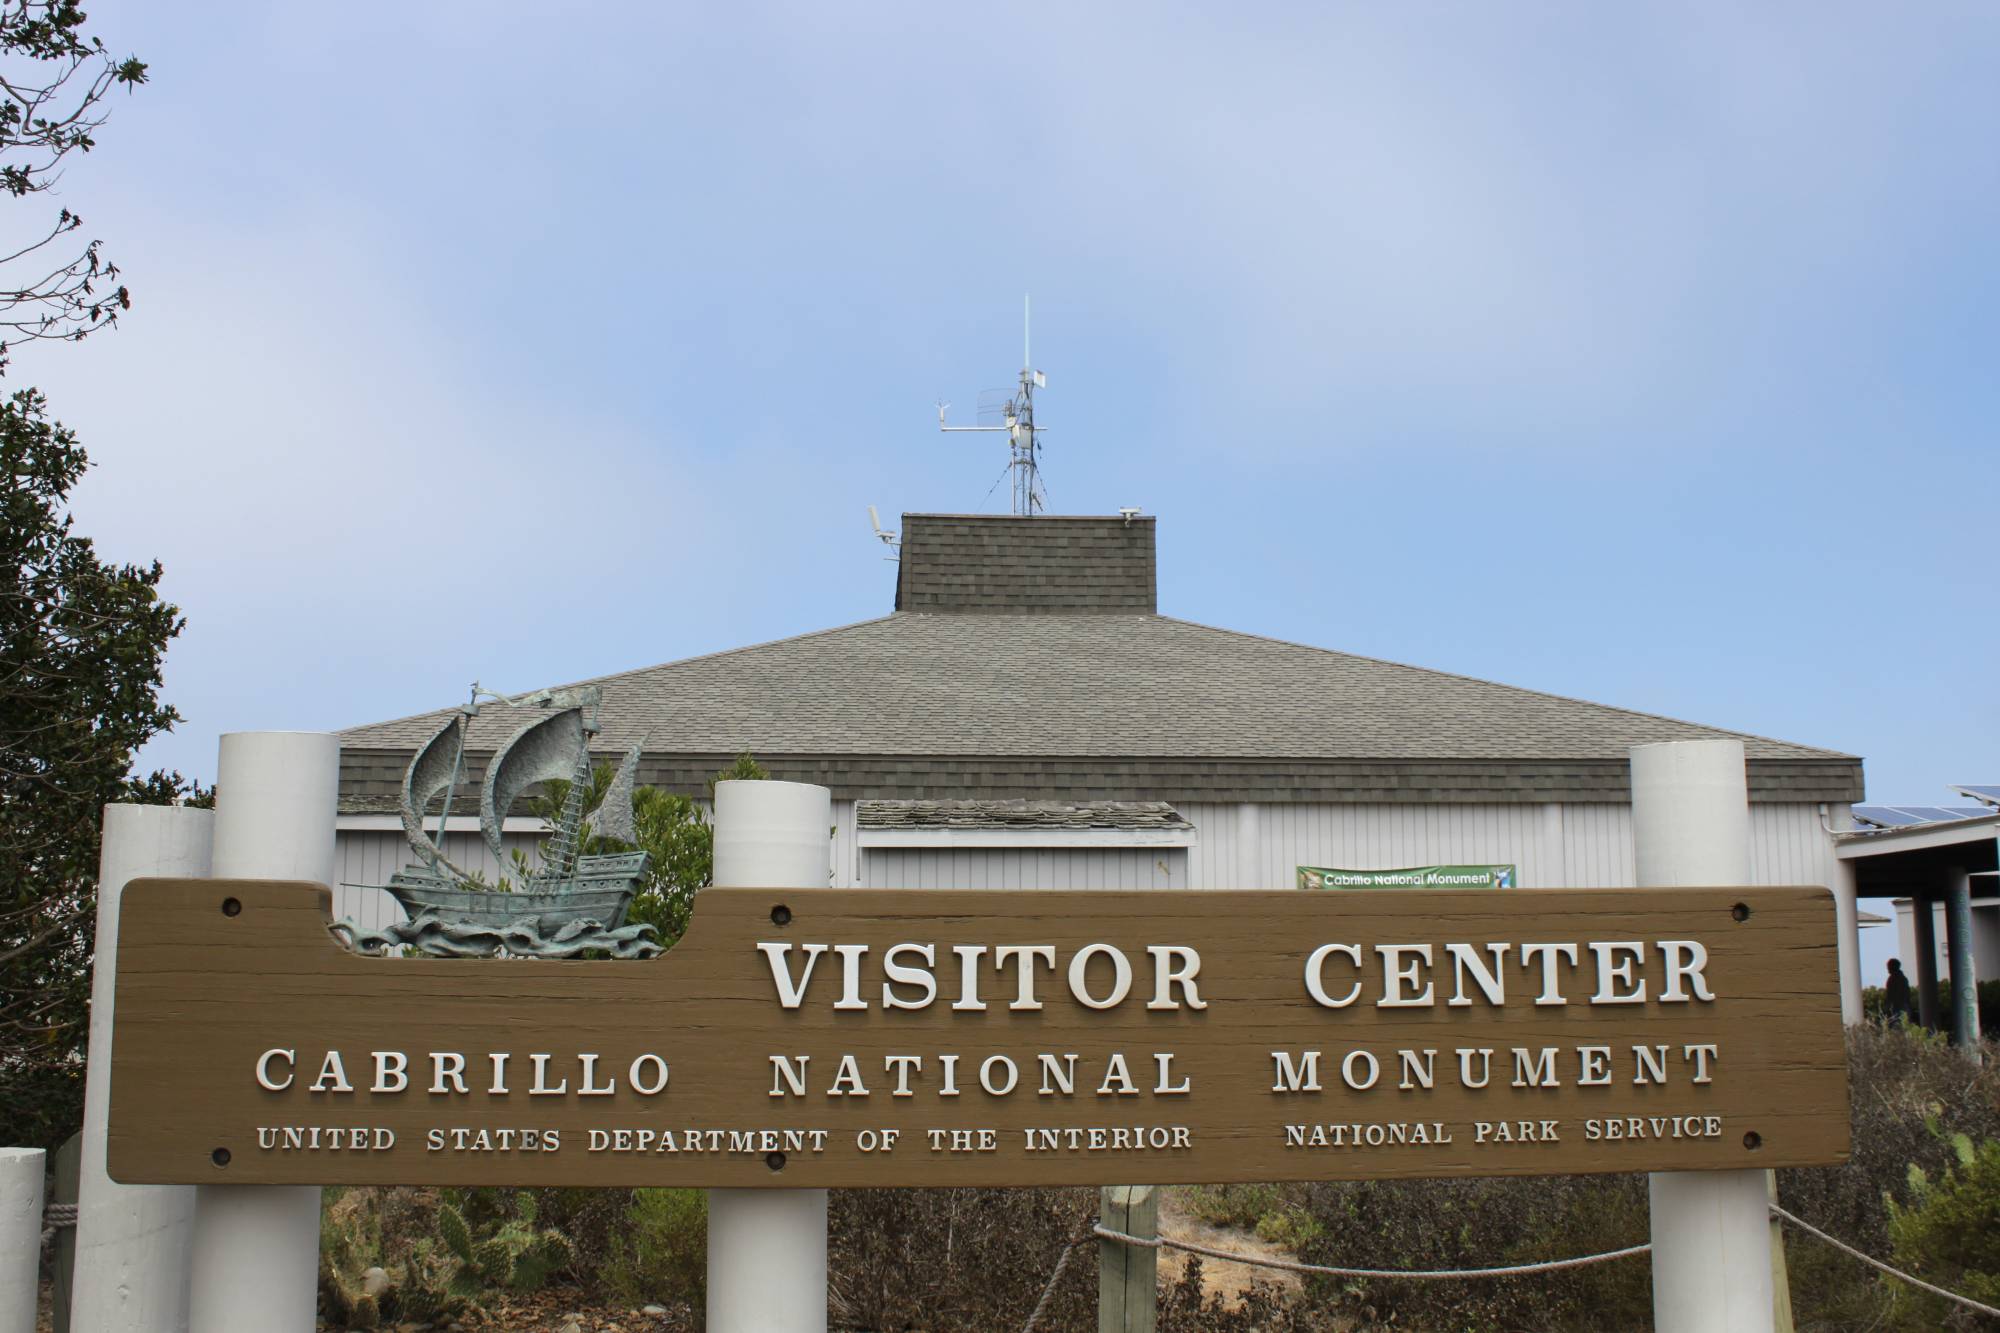 Cabrillo National Monument - San Diego (Visitor Center)